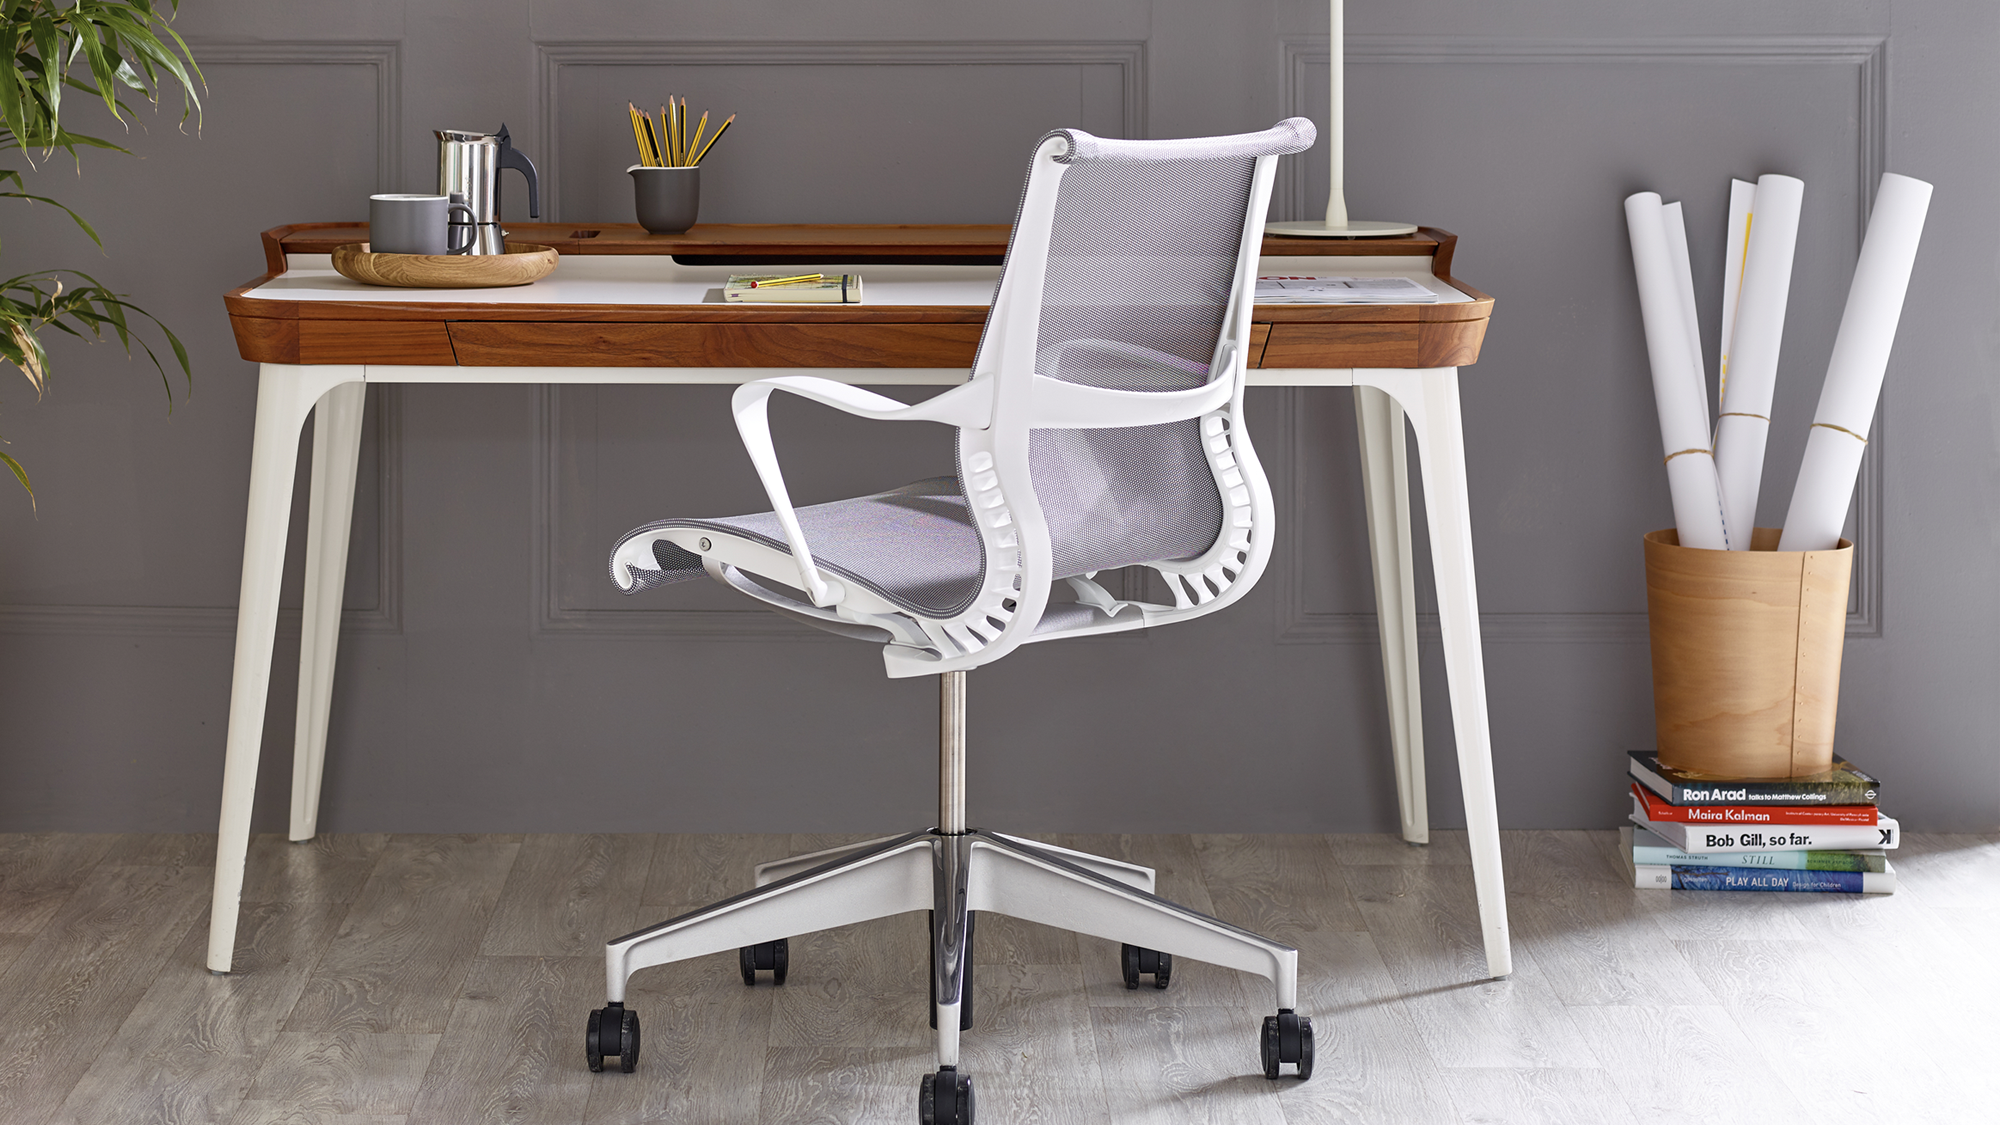 As ergonomically innovative as it is beautiful, the Cosm Chair instantly adjusts itself to fit you, for full body support.